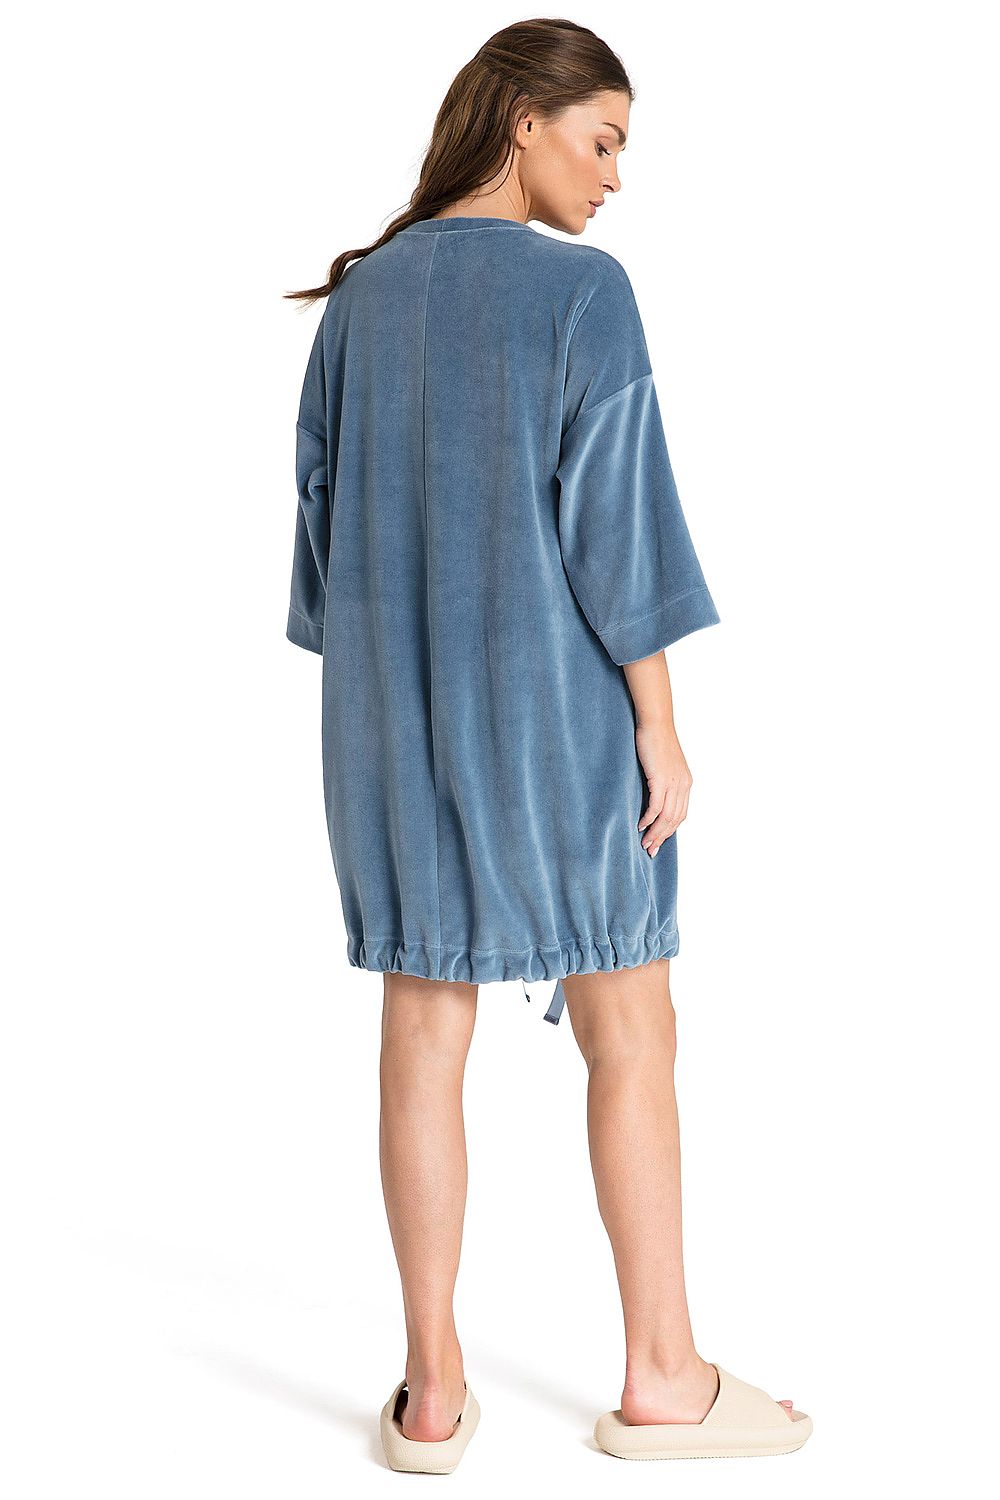 LaLupa Relaxed Fit Tunic Dress Blue Marine